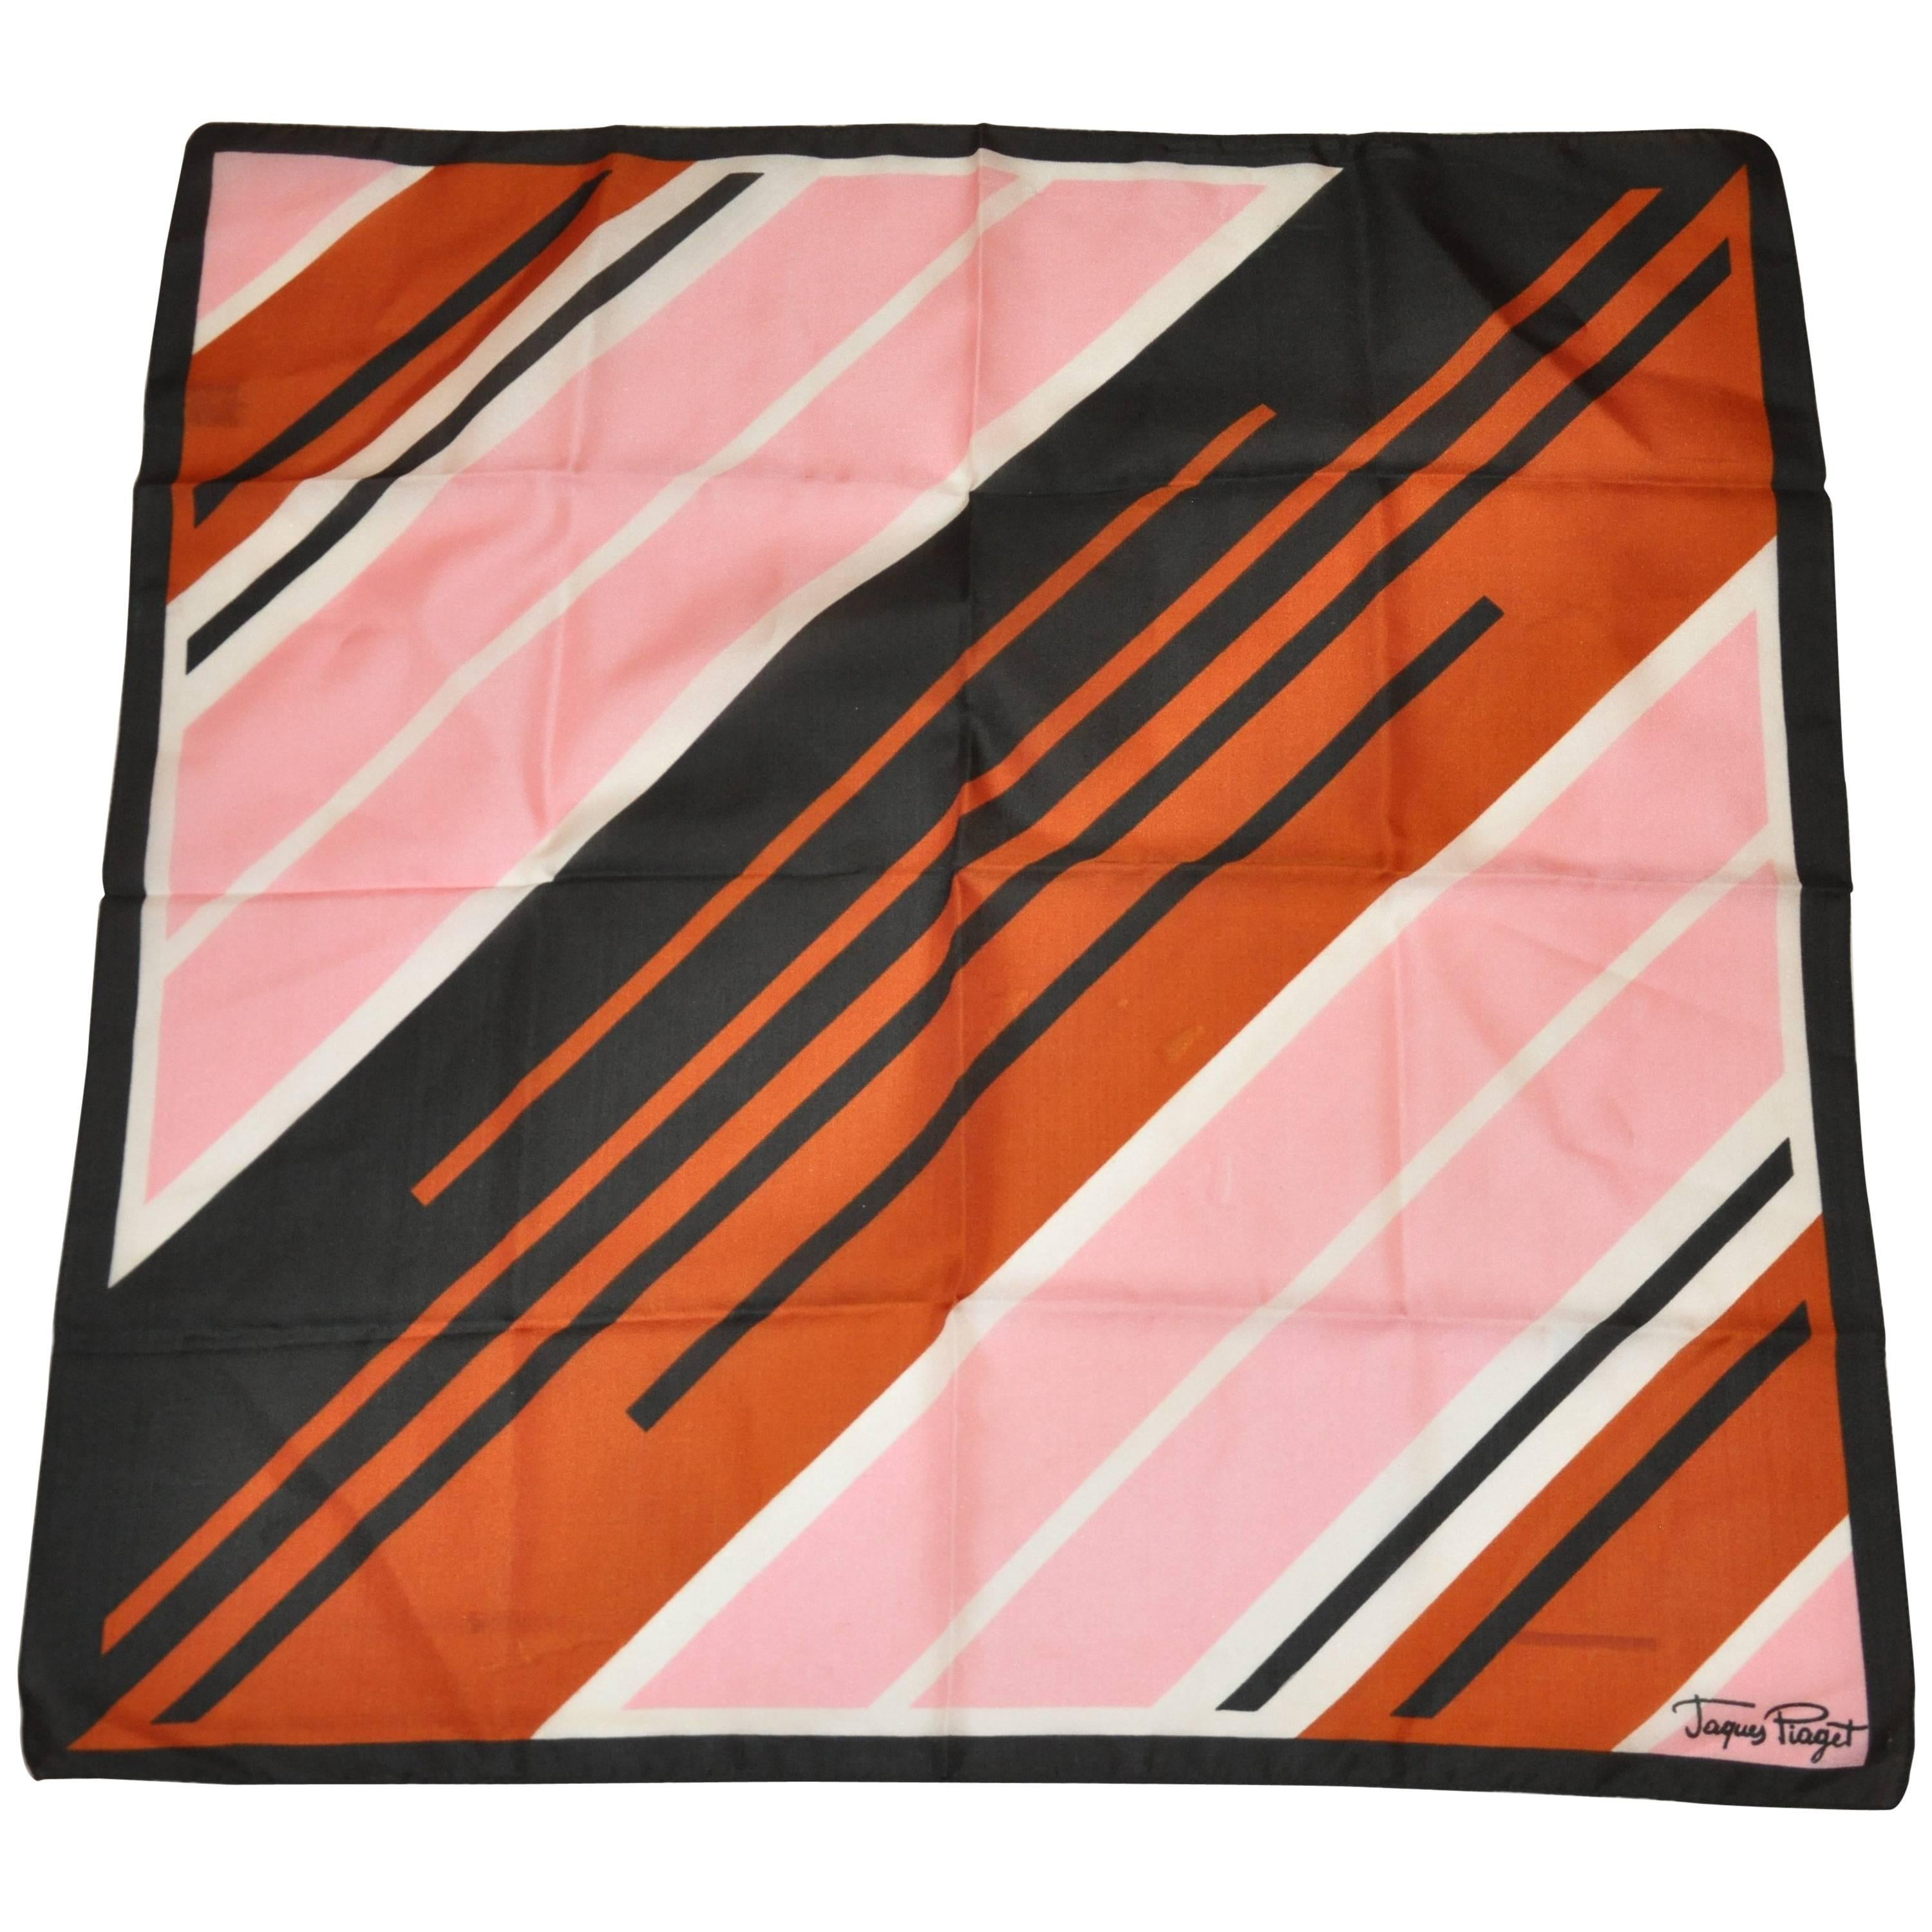 Jaques Piaget Coco Brown Border with Multi-Color Multi-Stripe Scarf